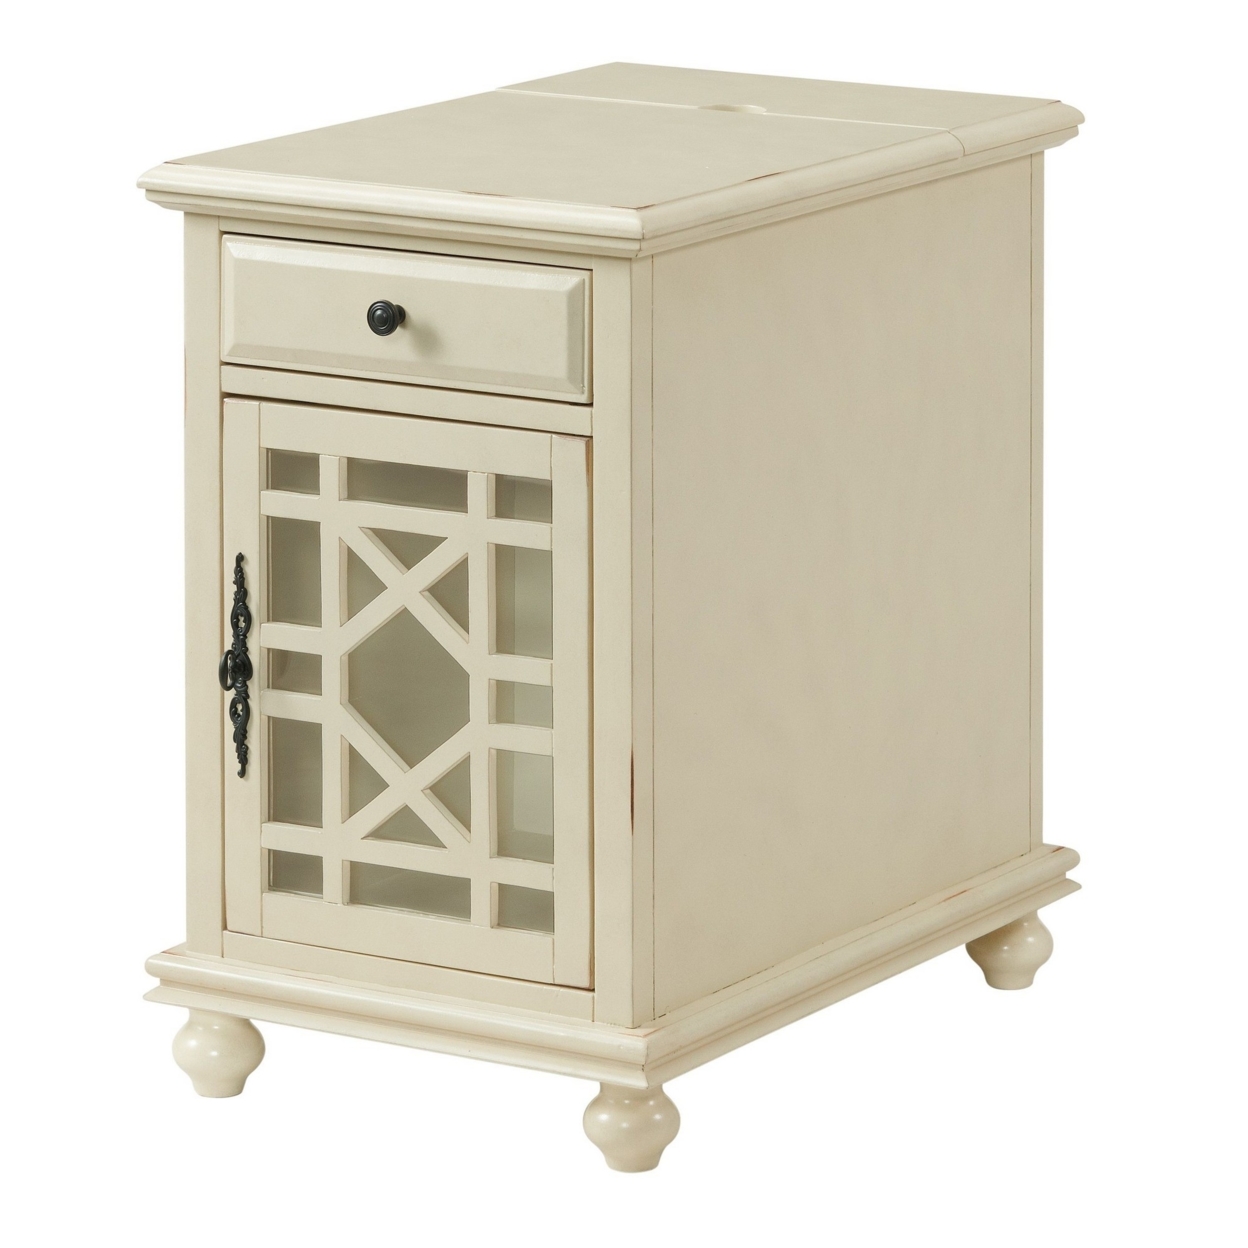 Chairside Table With 1 Drawer And 1 Trellis Door, Antique White- Saltoro Sherpi